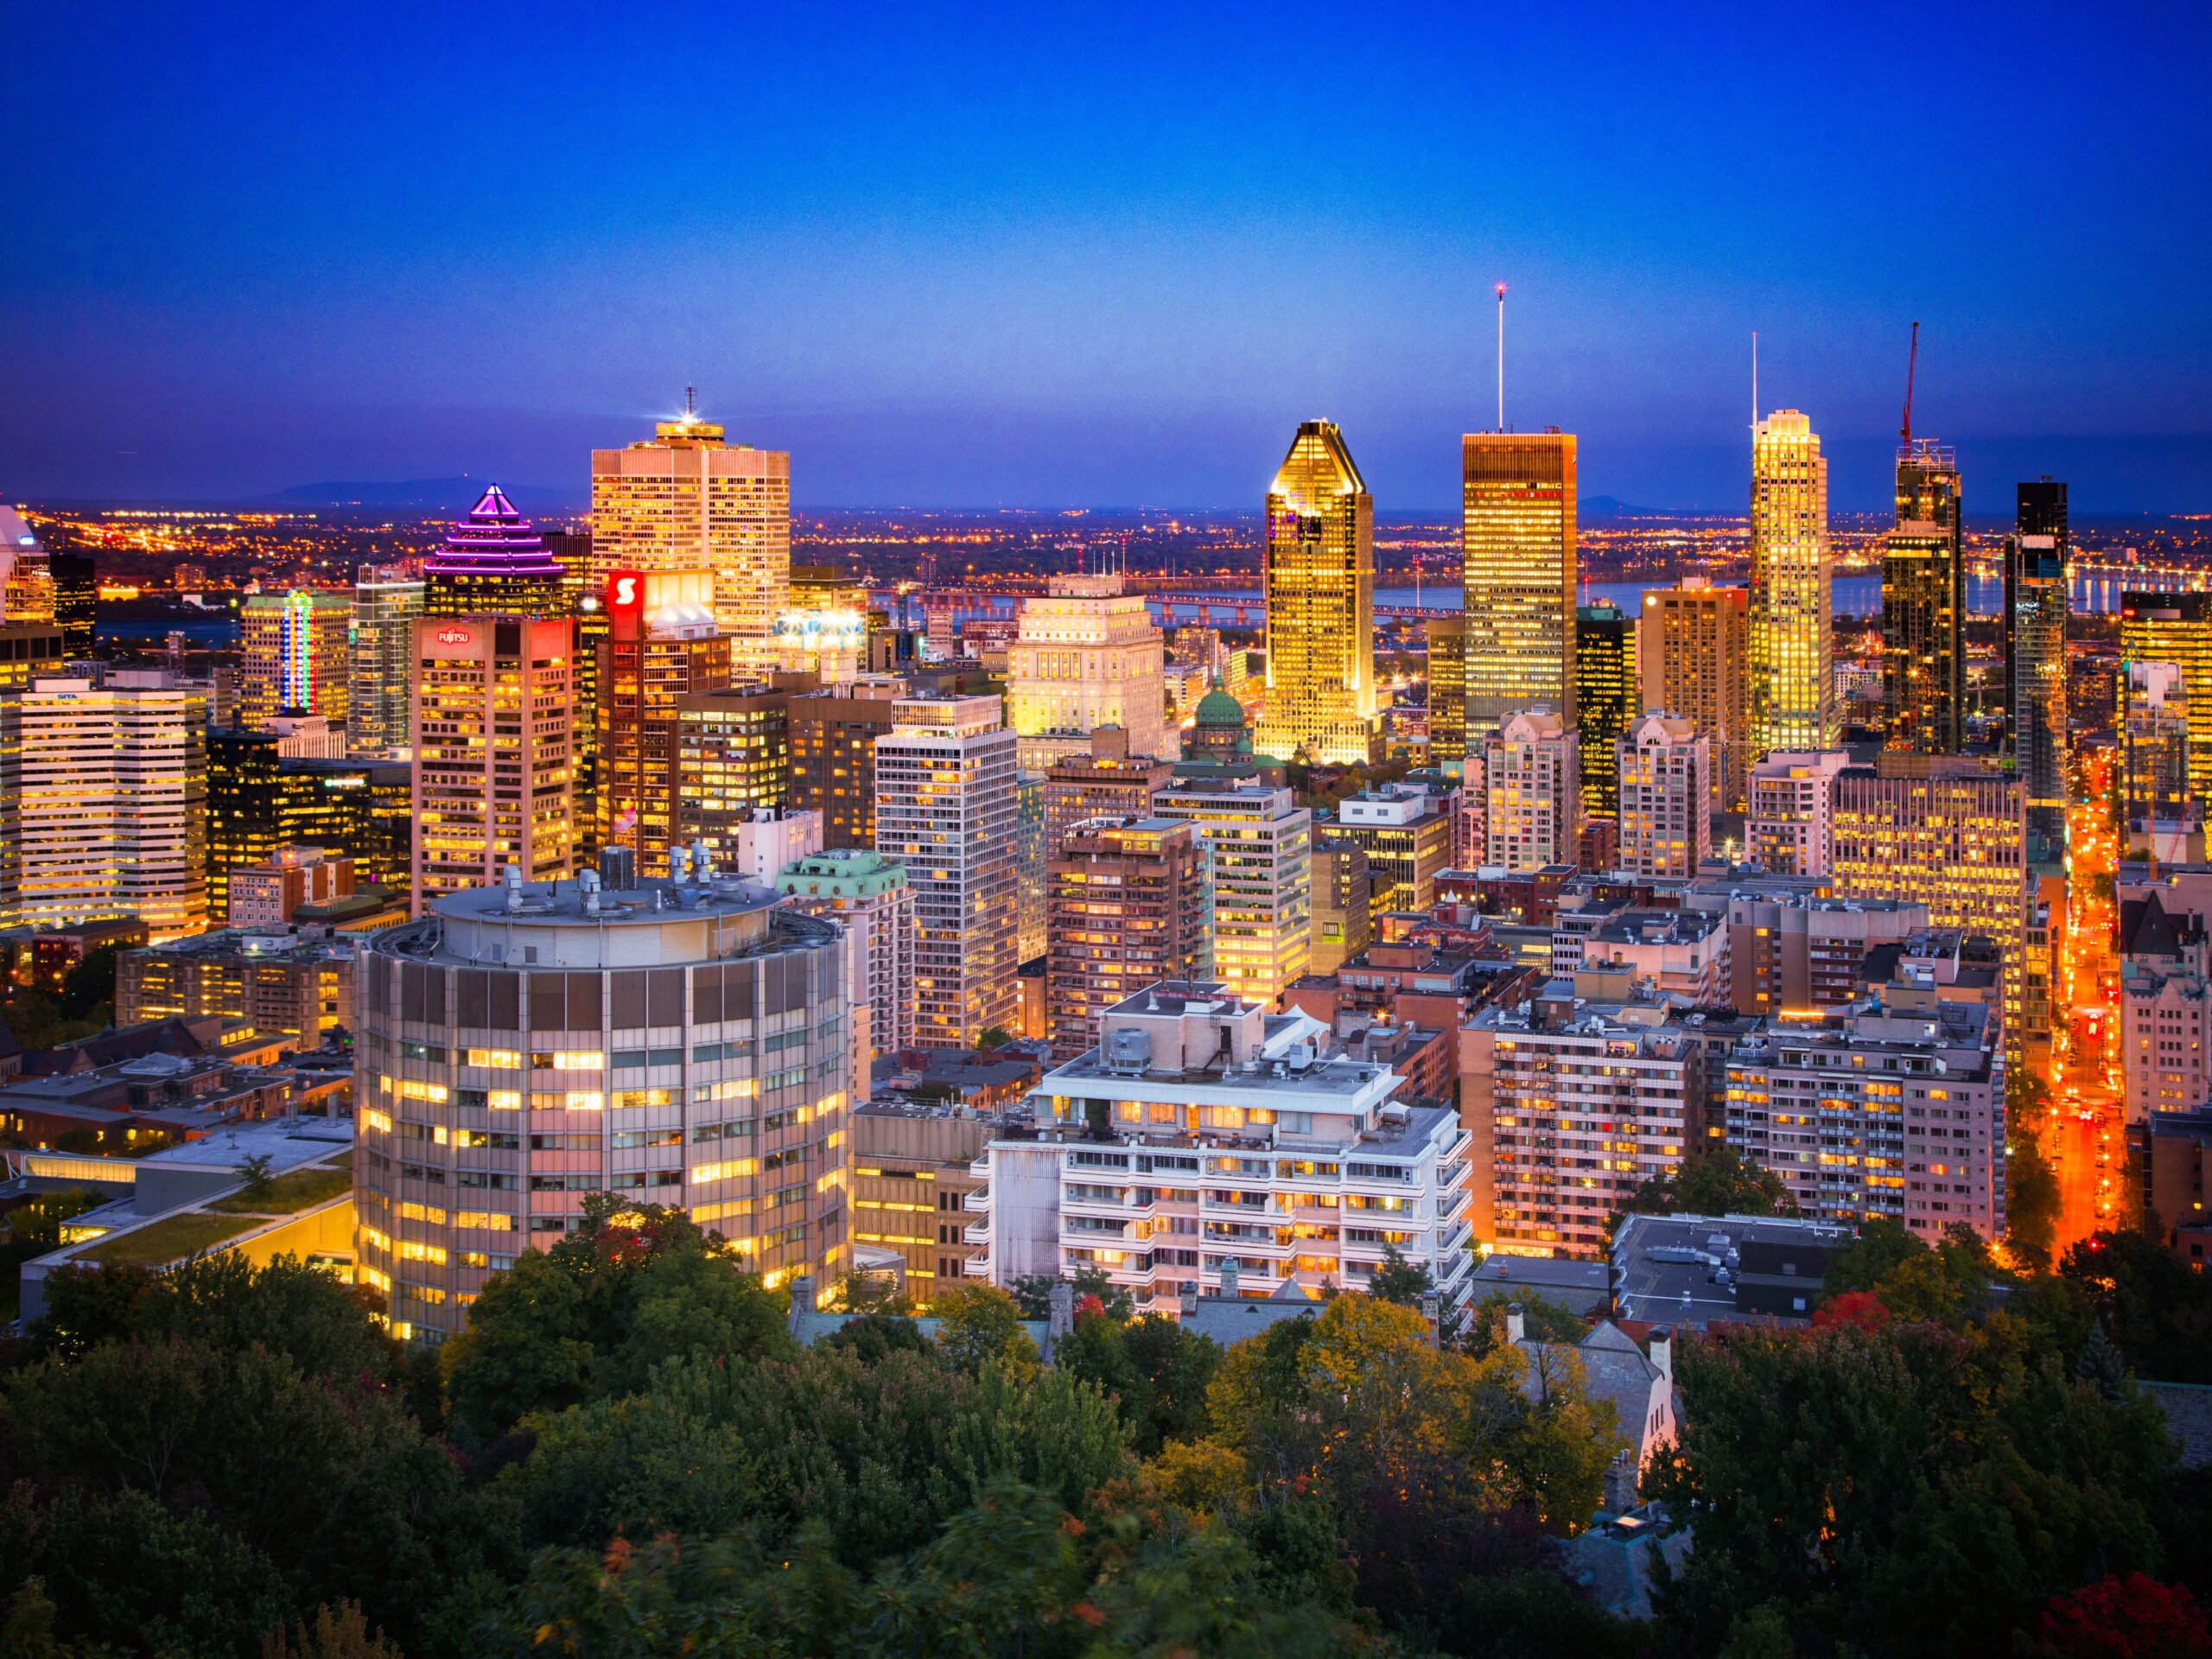 Night time skyline of downtown Montreal, Quebec.